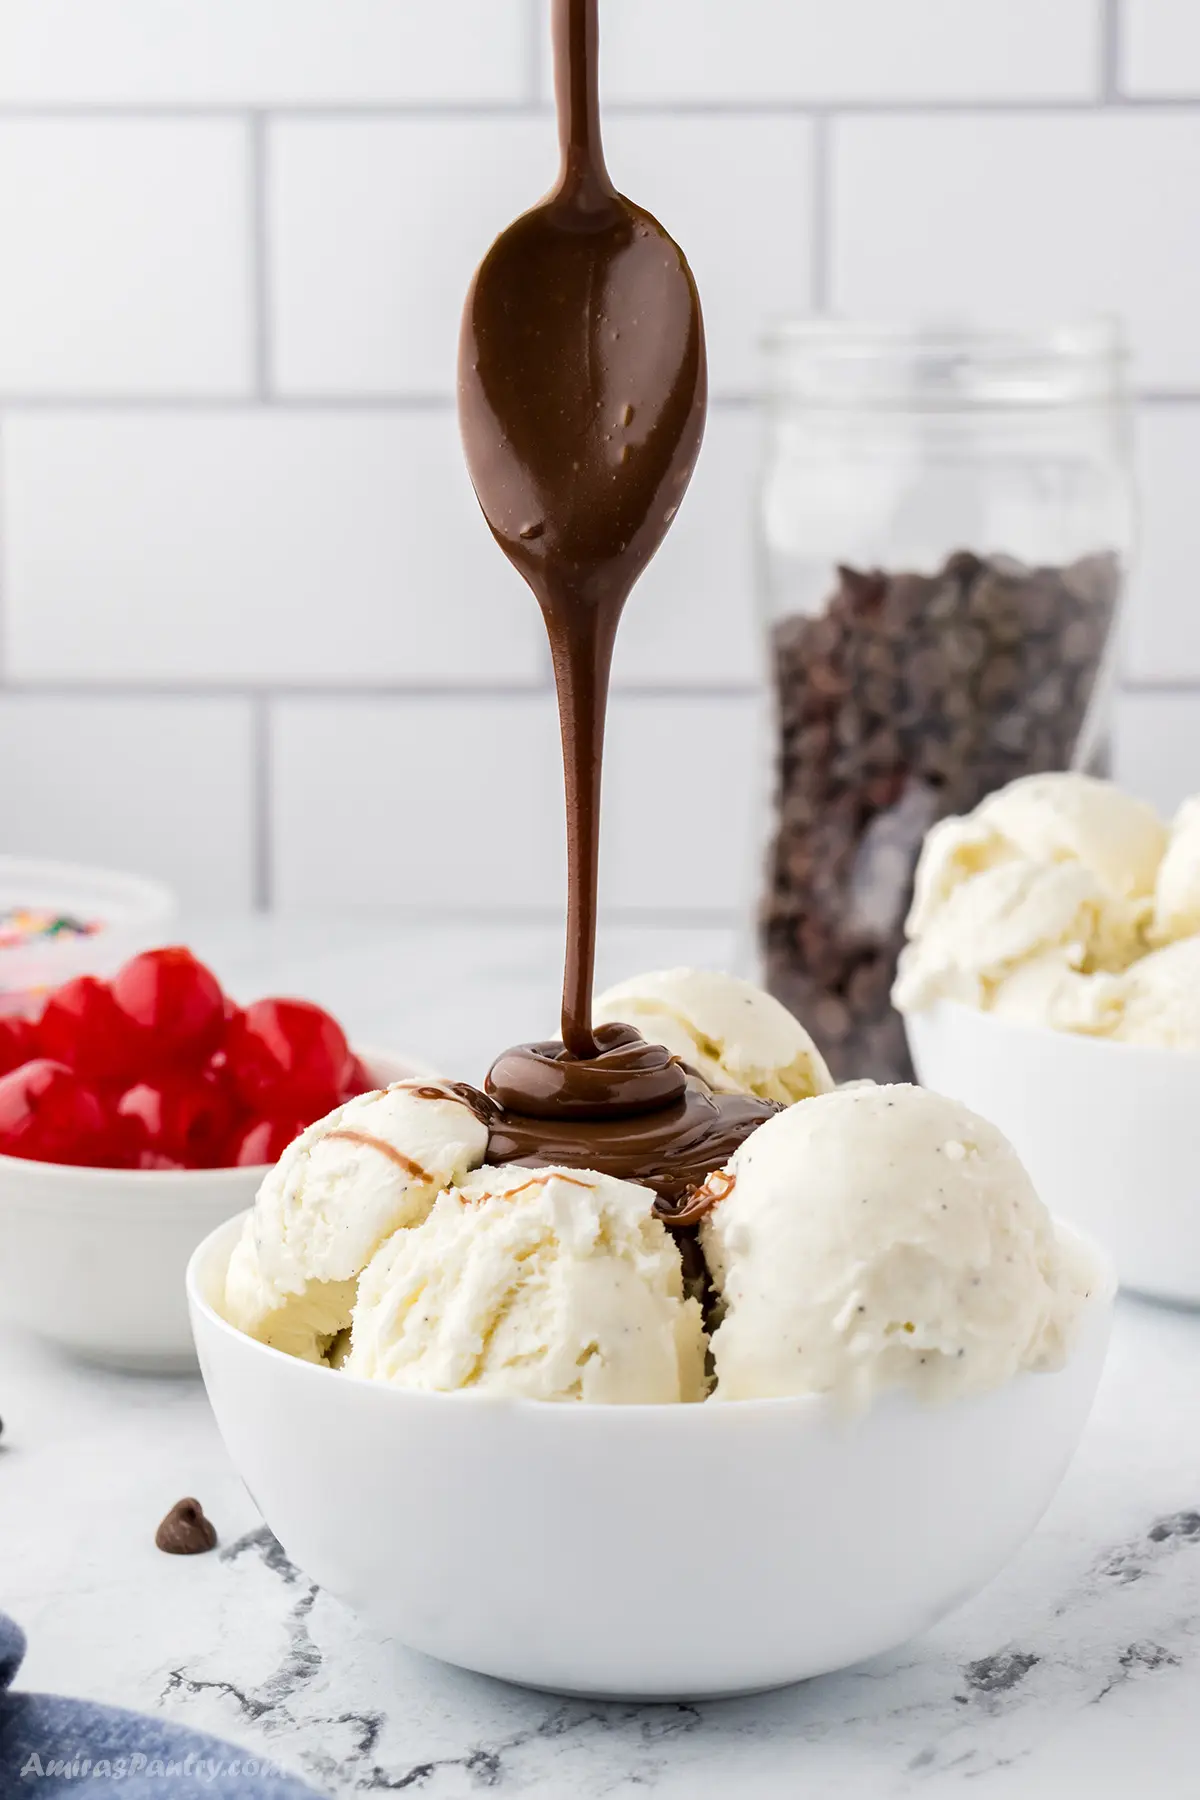 A spoon drizzling some hot fudge sauce over a bowl of ice cream.